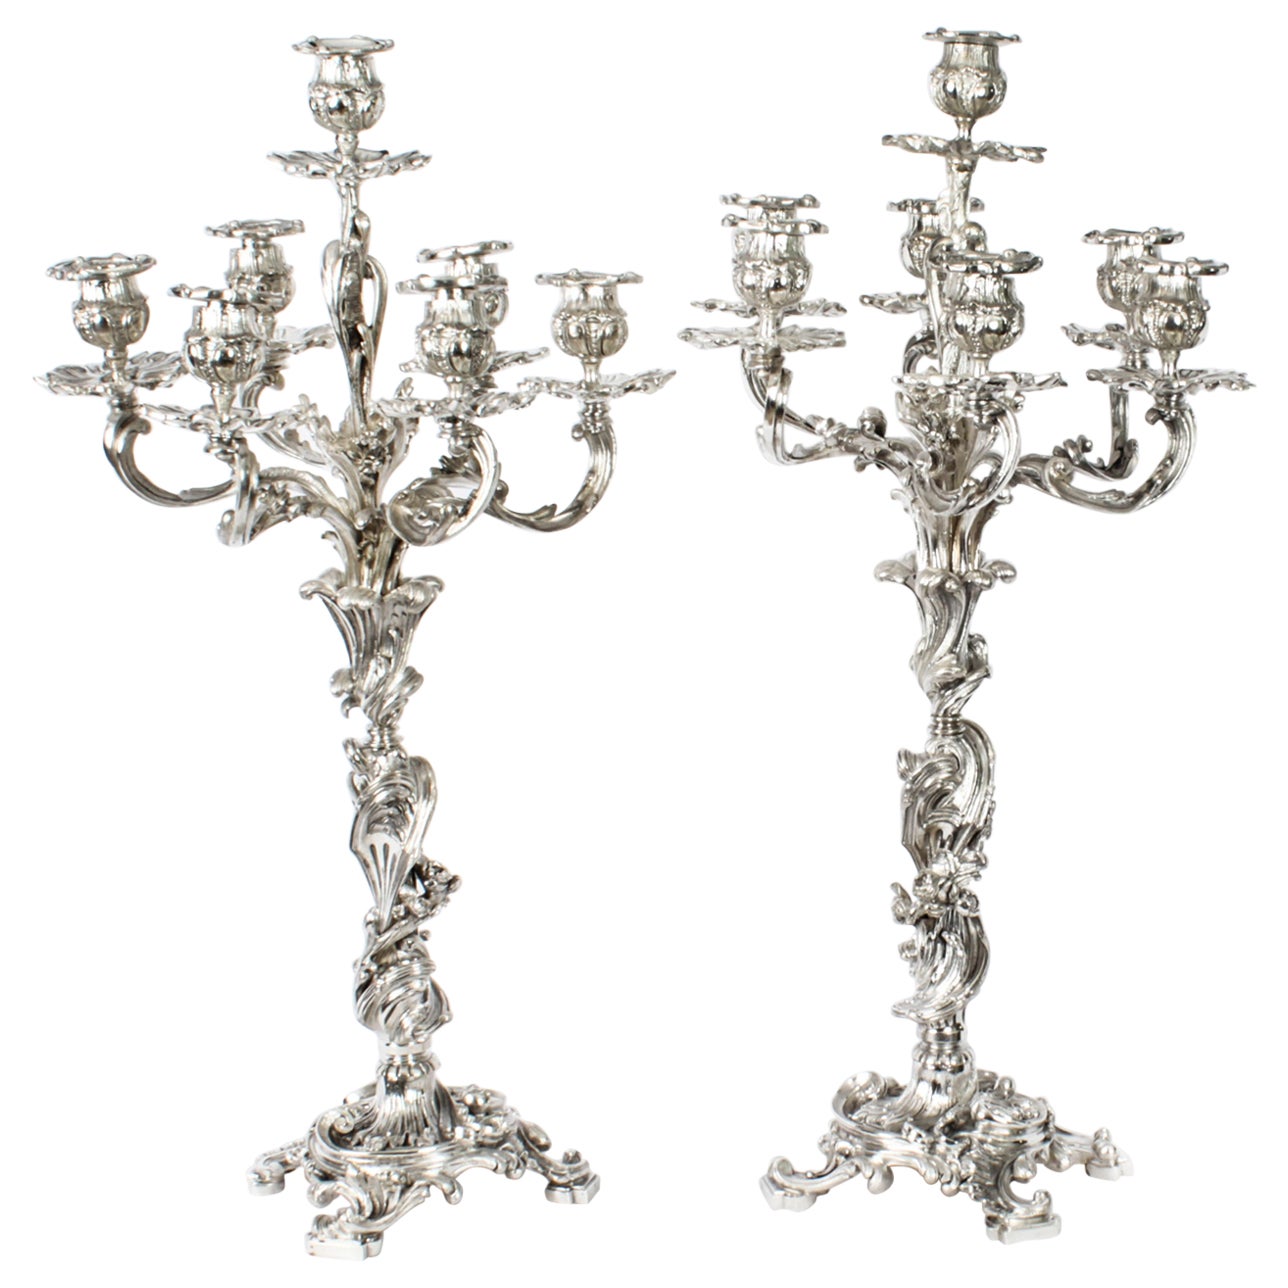 Antique Pair French Rococo Revival 7 Light Silver Plated Candelabra 1920s